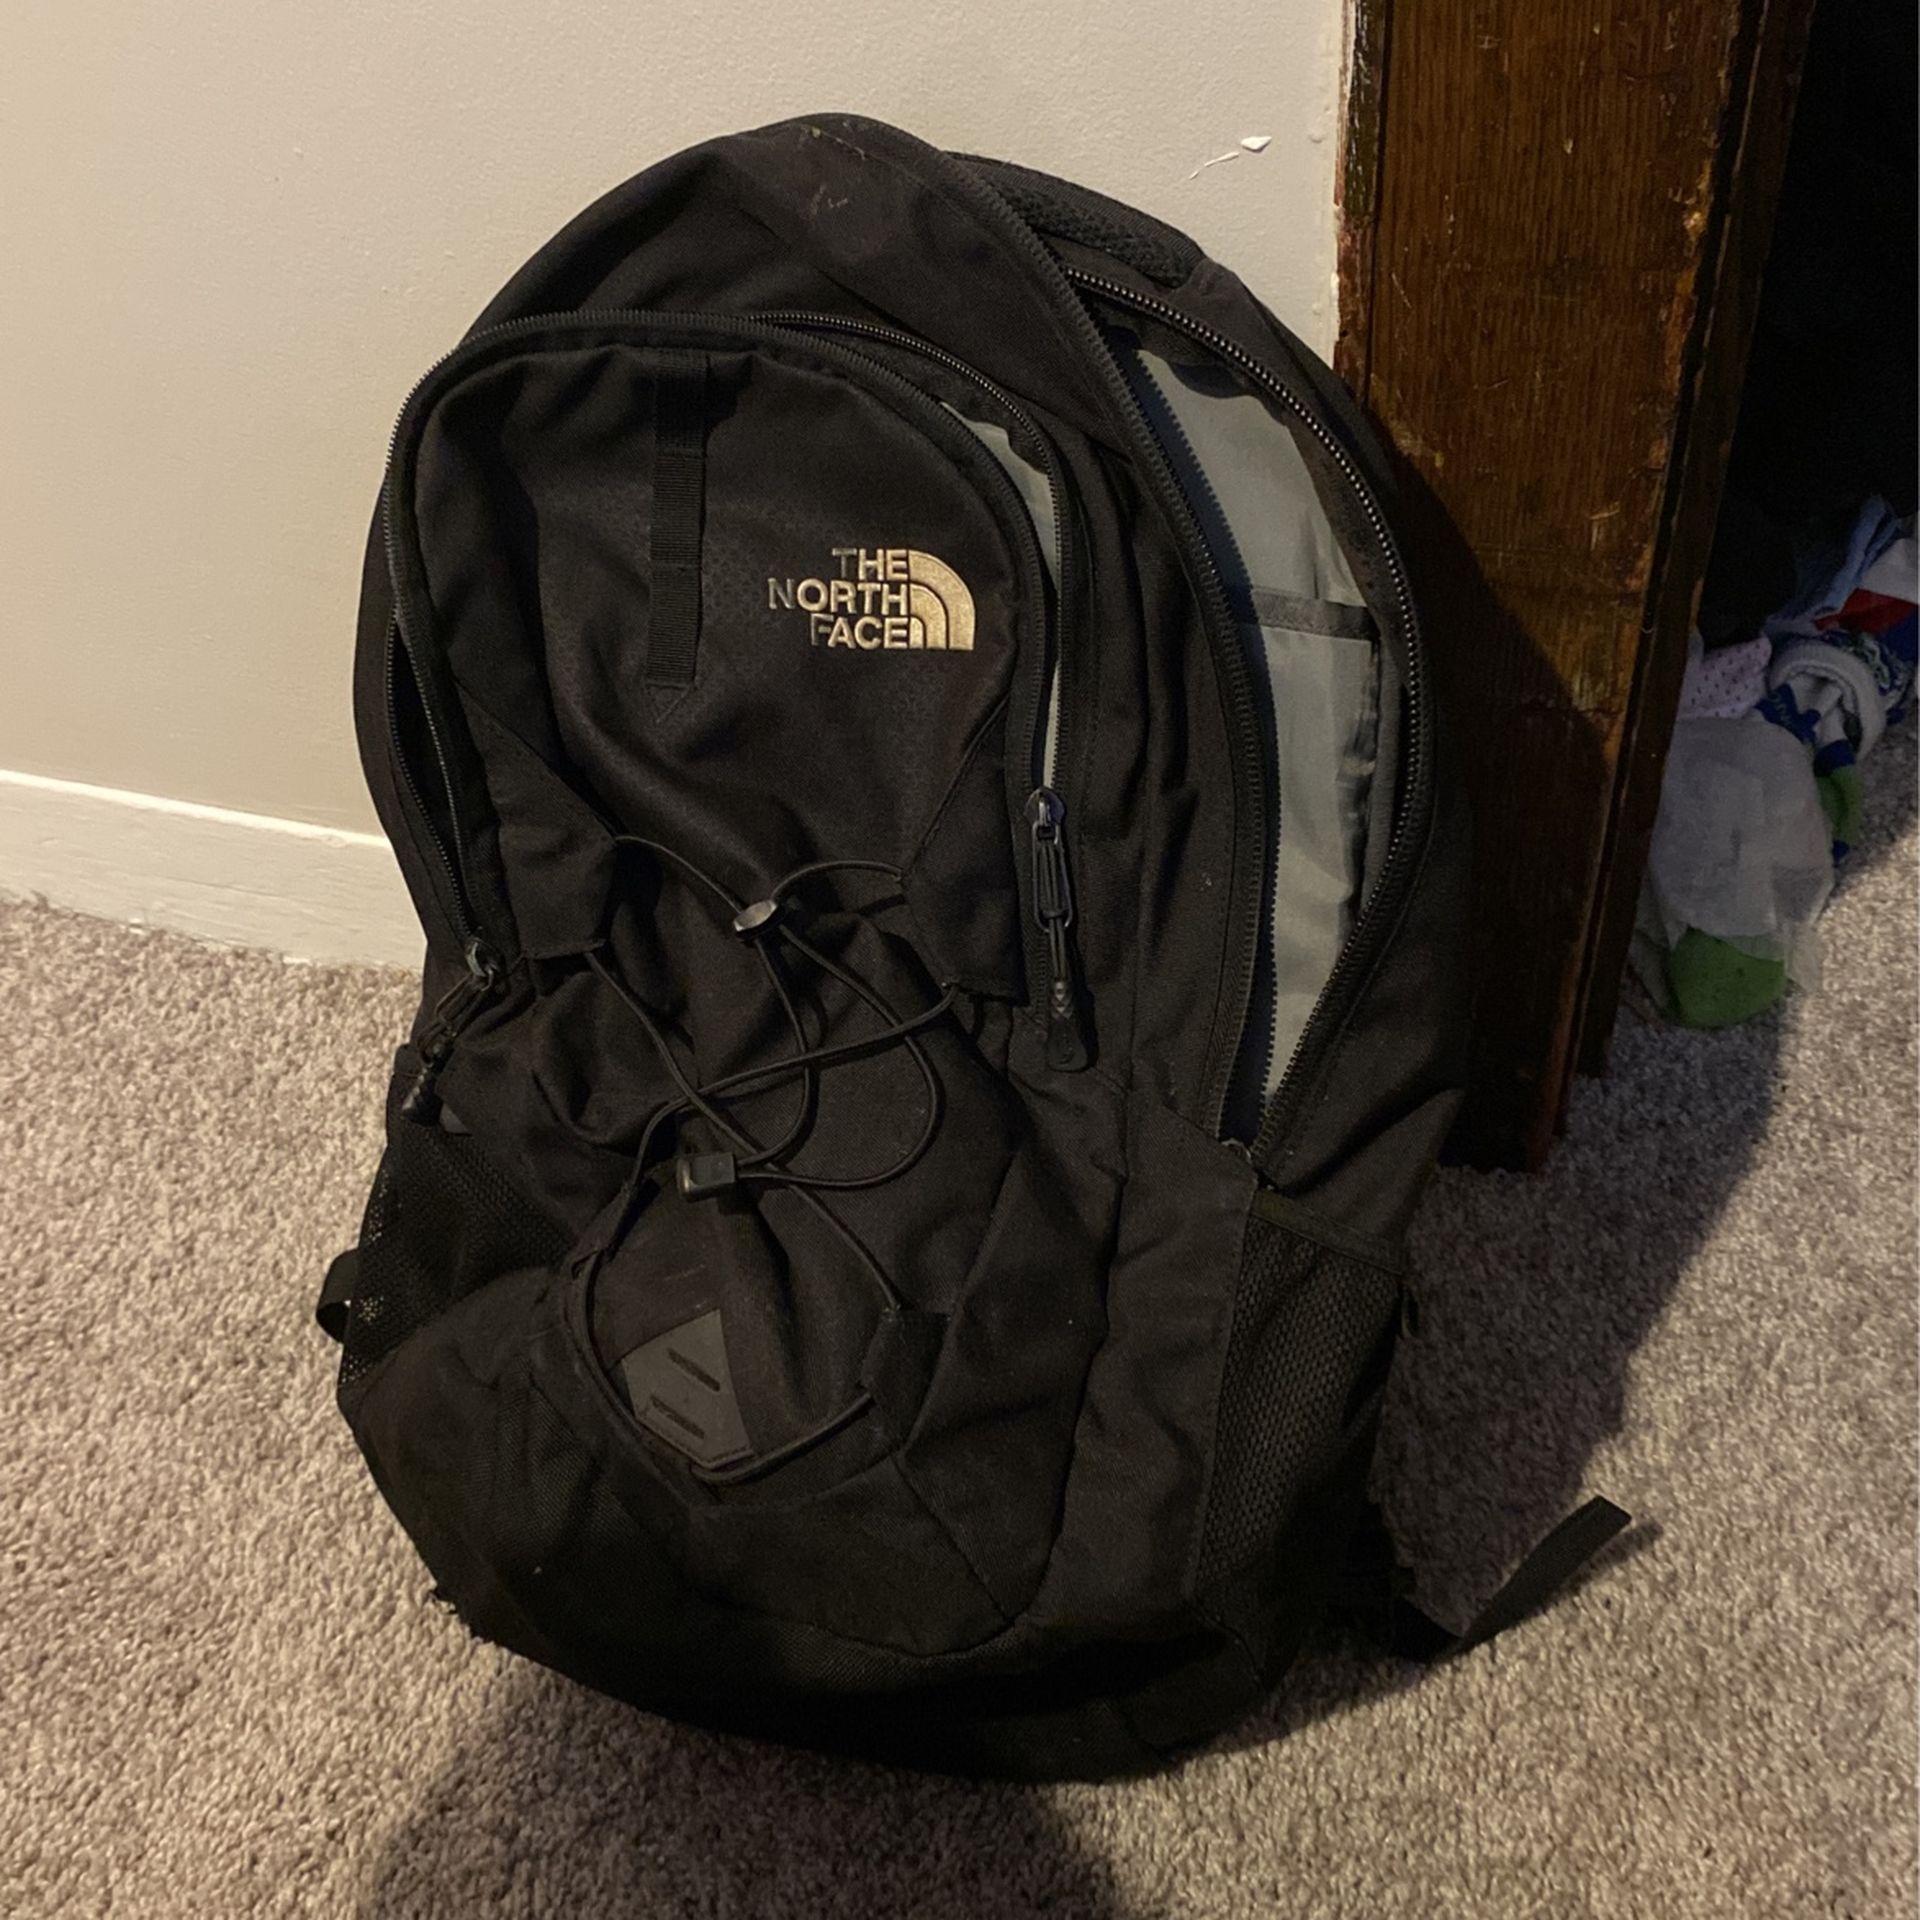 Used backpack,  great for hikes or weekends away